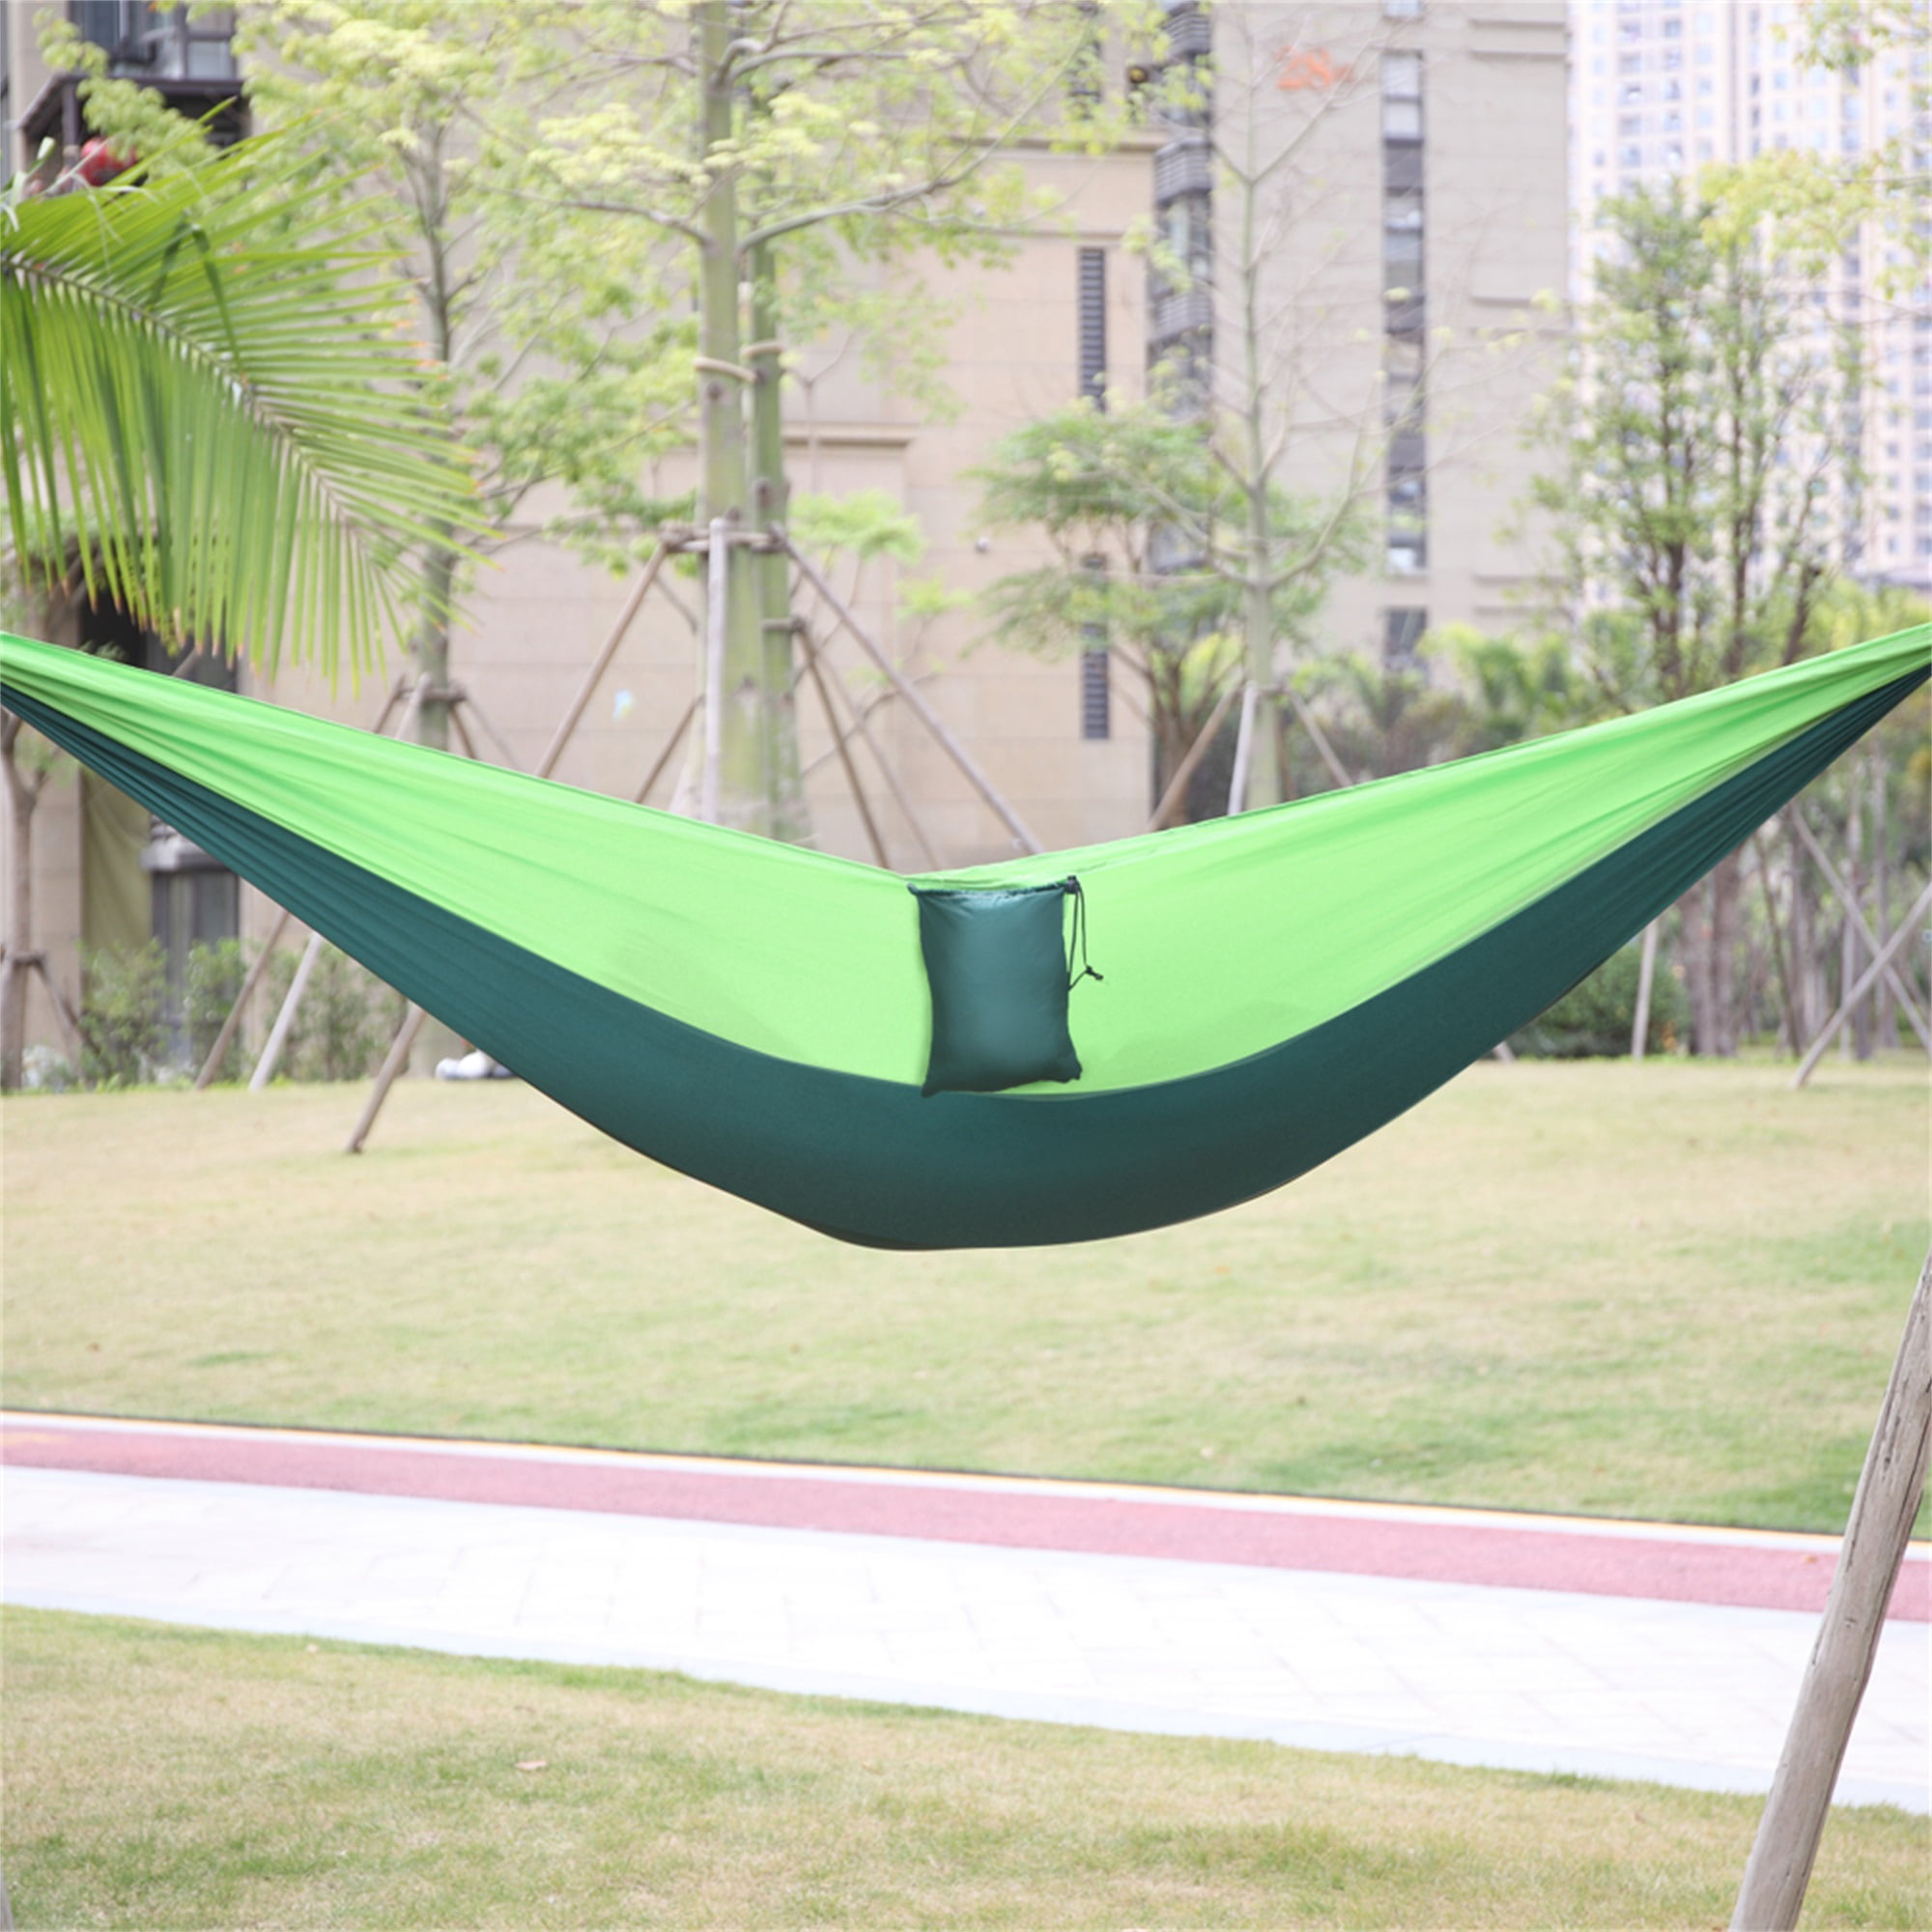 YUCAN Double Camping Portable Hammock,Portable Parachute Hammock Suitable for Outdoor Beach Yard,Perfect Choice for Backpacking Gear（Gray Blue） 